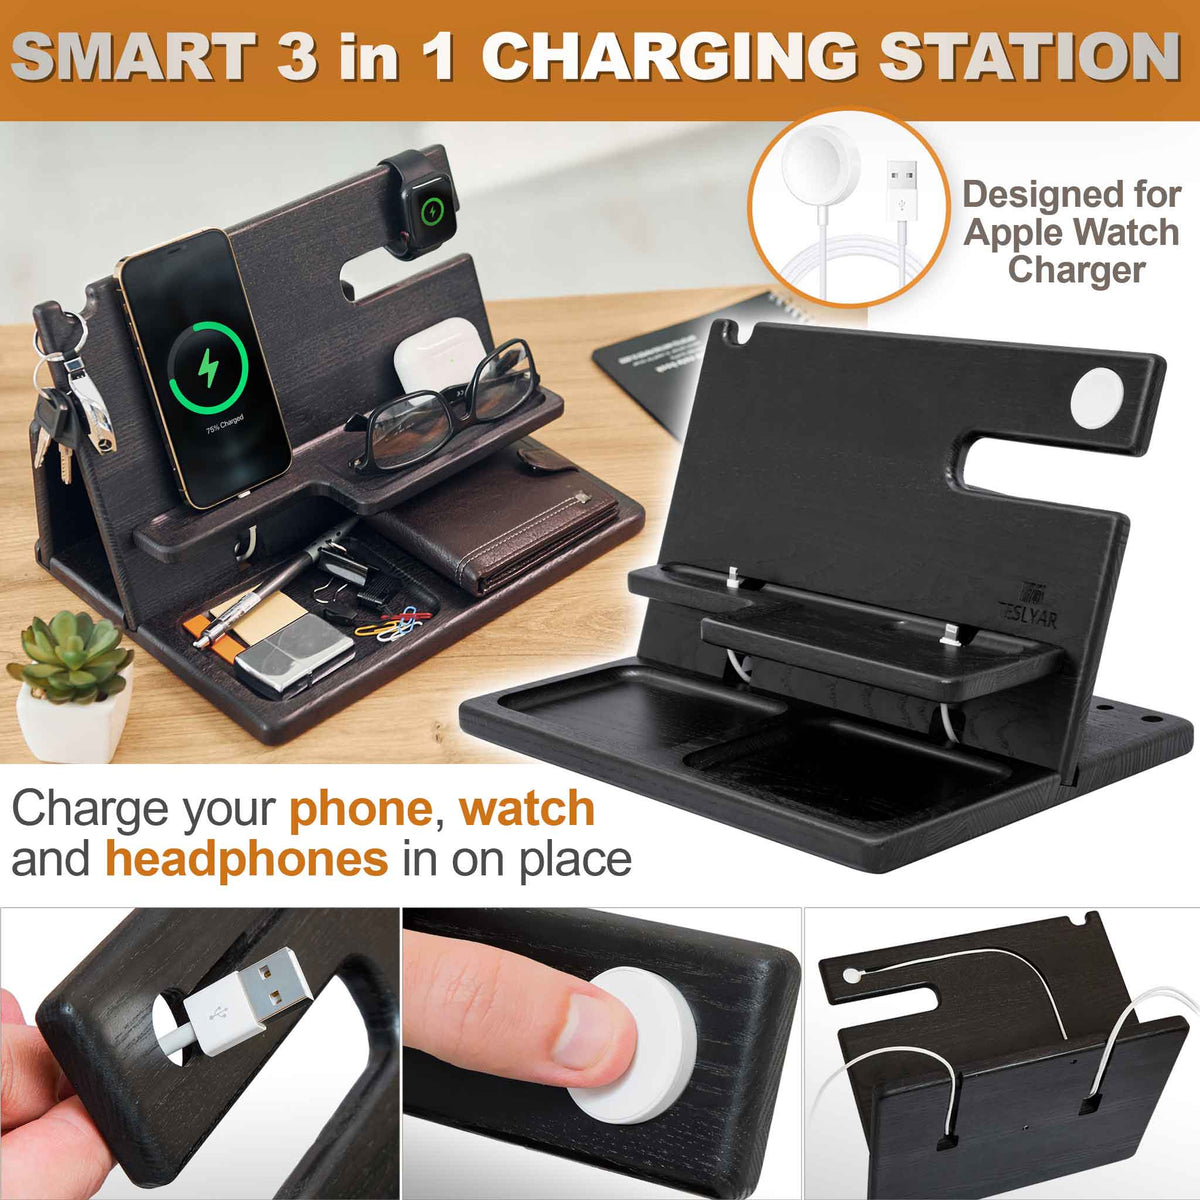 Smart 3 in 1 charging stand